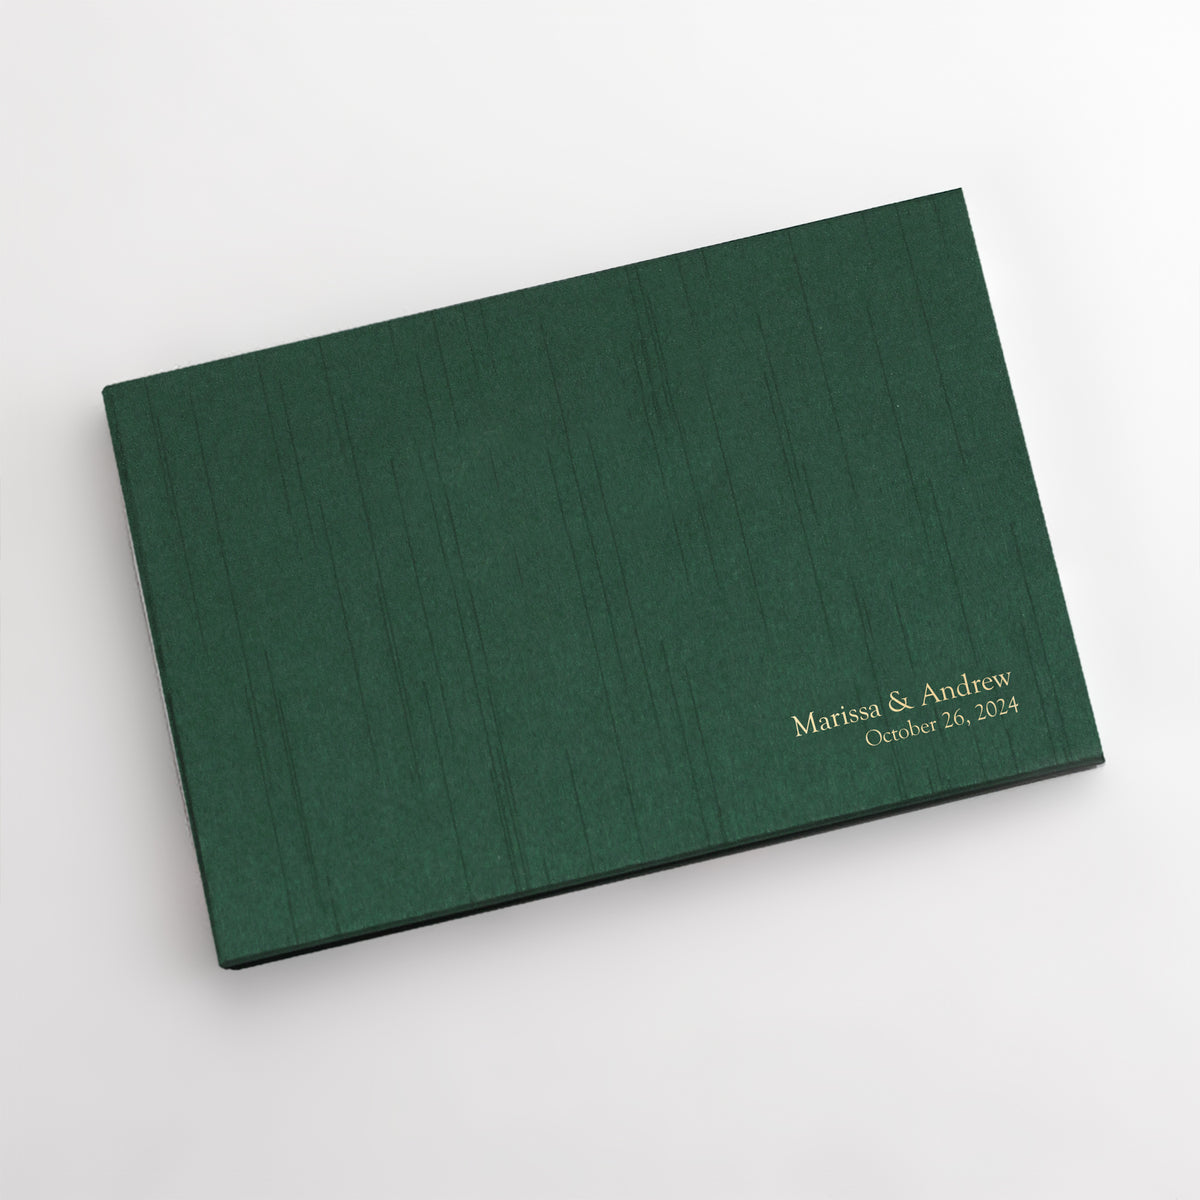 Classic Guestbook | Cover: Emerald Silk | Available Personalized